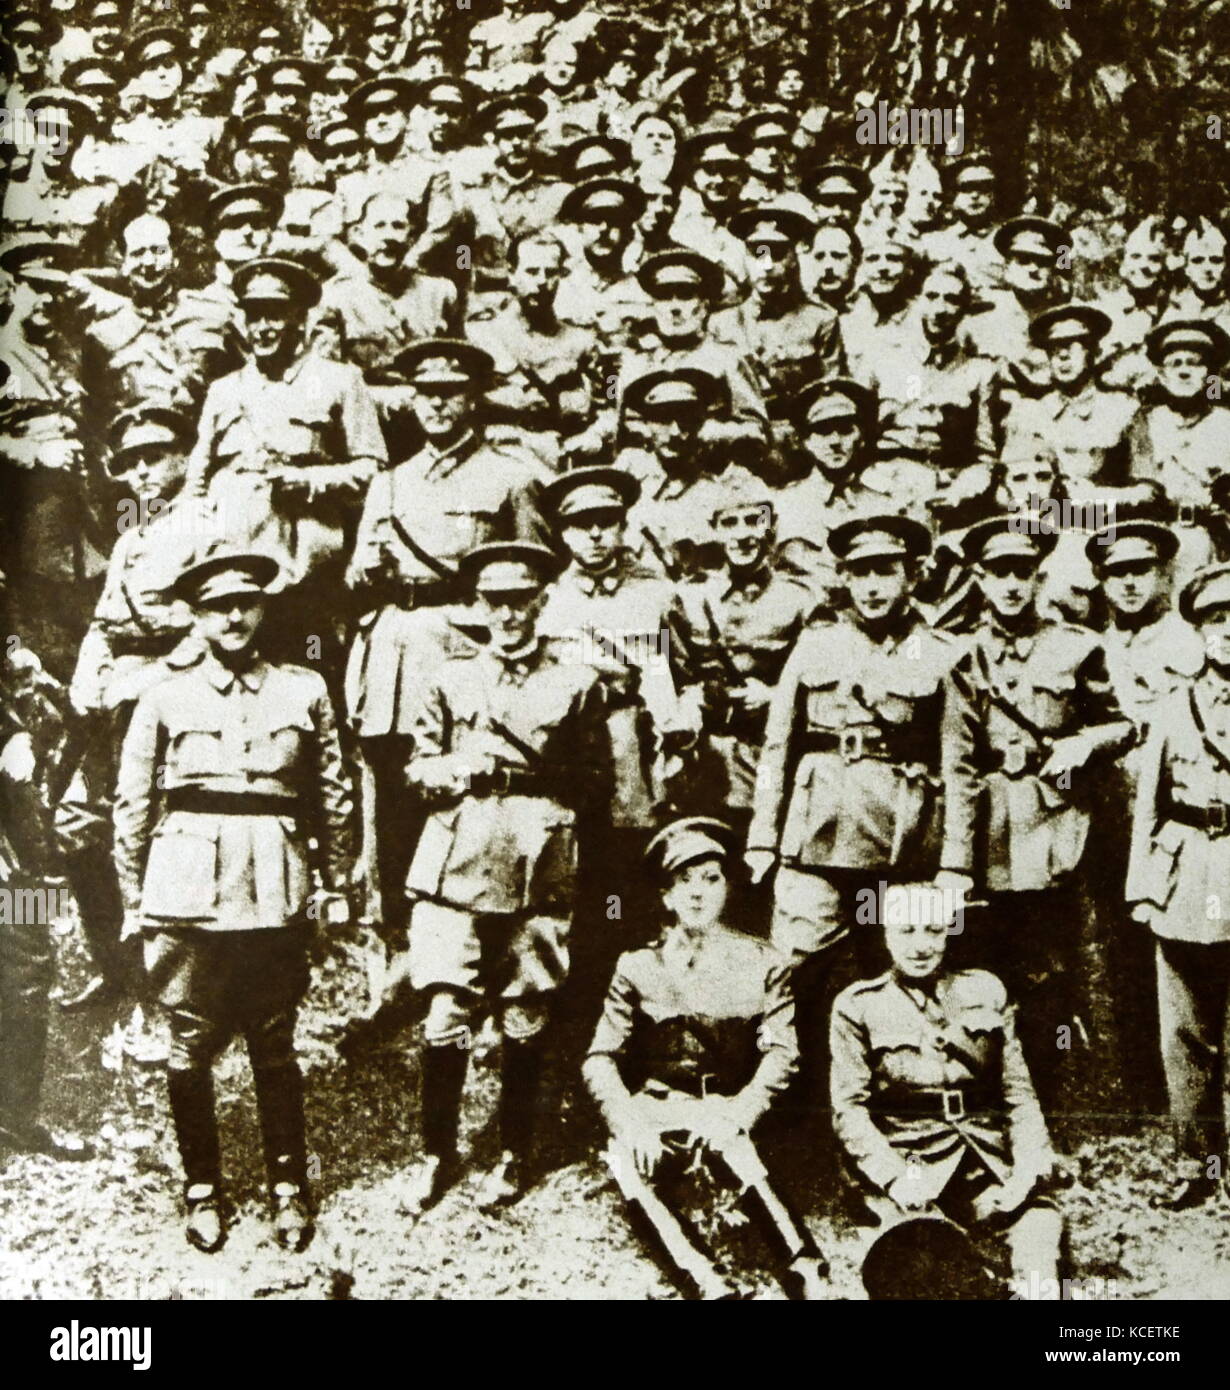 General Franco with senior military officers in Tenerife prior to the outbreak of the Spanish Civil War 1936. Francisco Franco Bahamonde (1892 – 1975) Spanish general, dictator and the Caudillo of Spain from 1939 until his death. Stock Photo